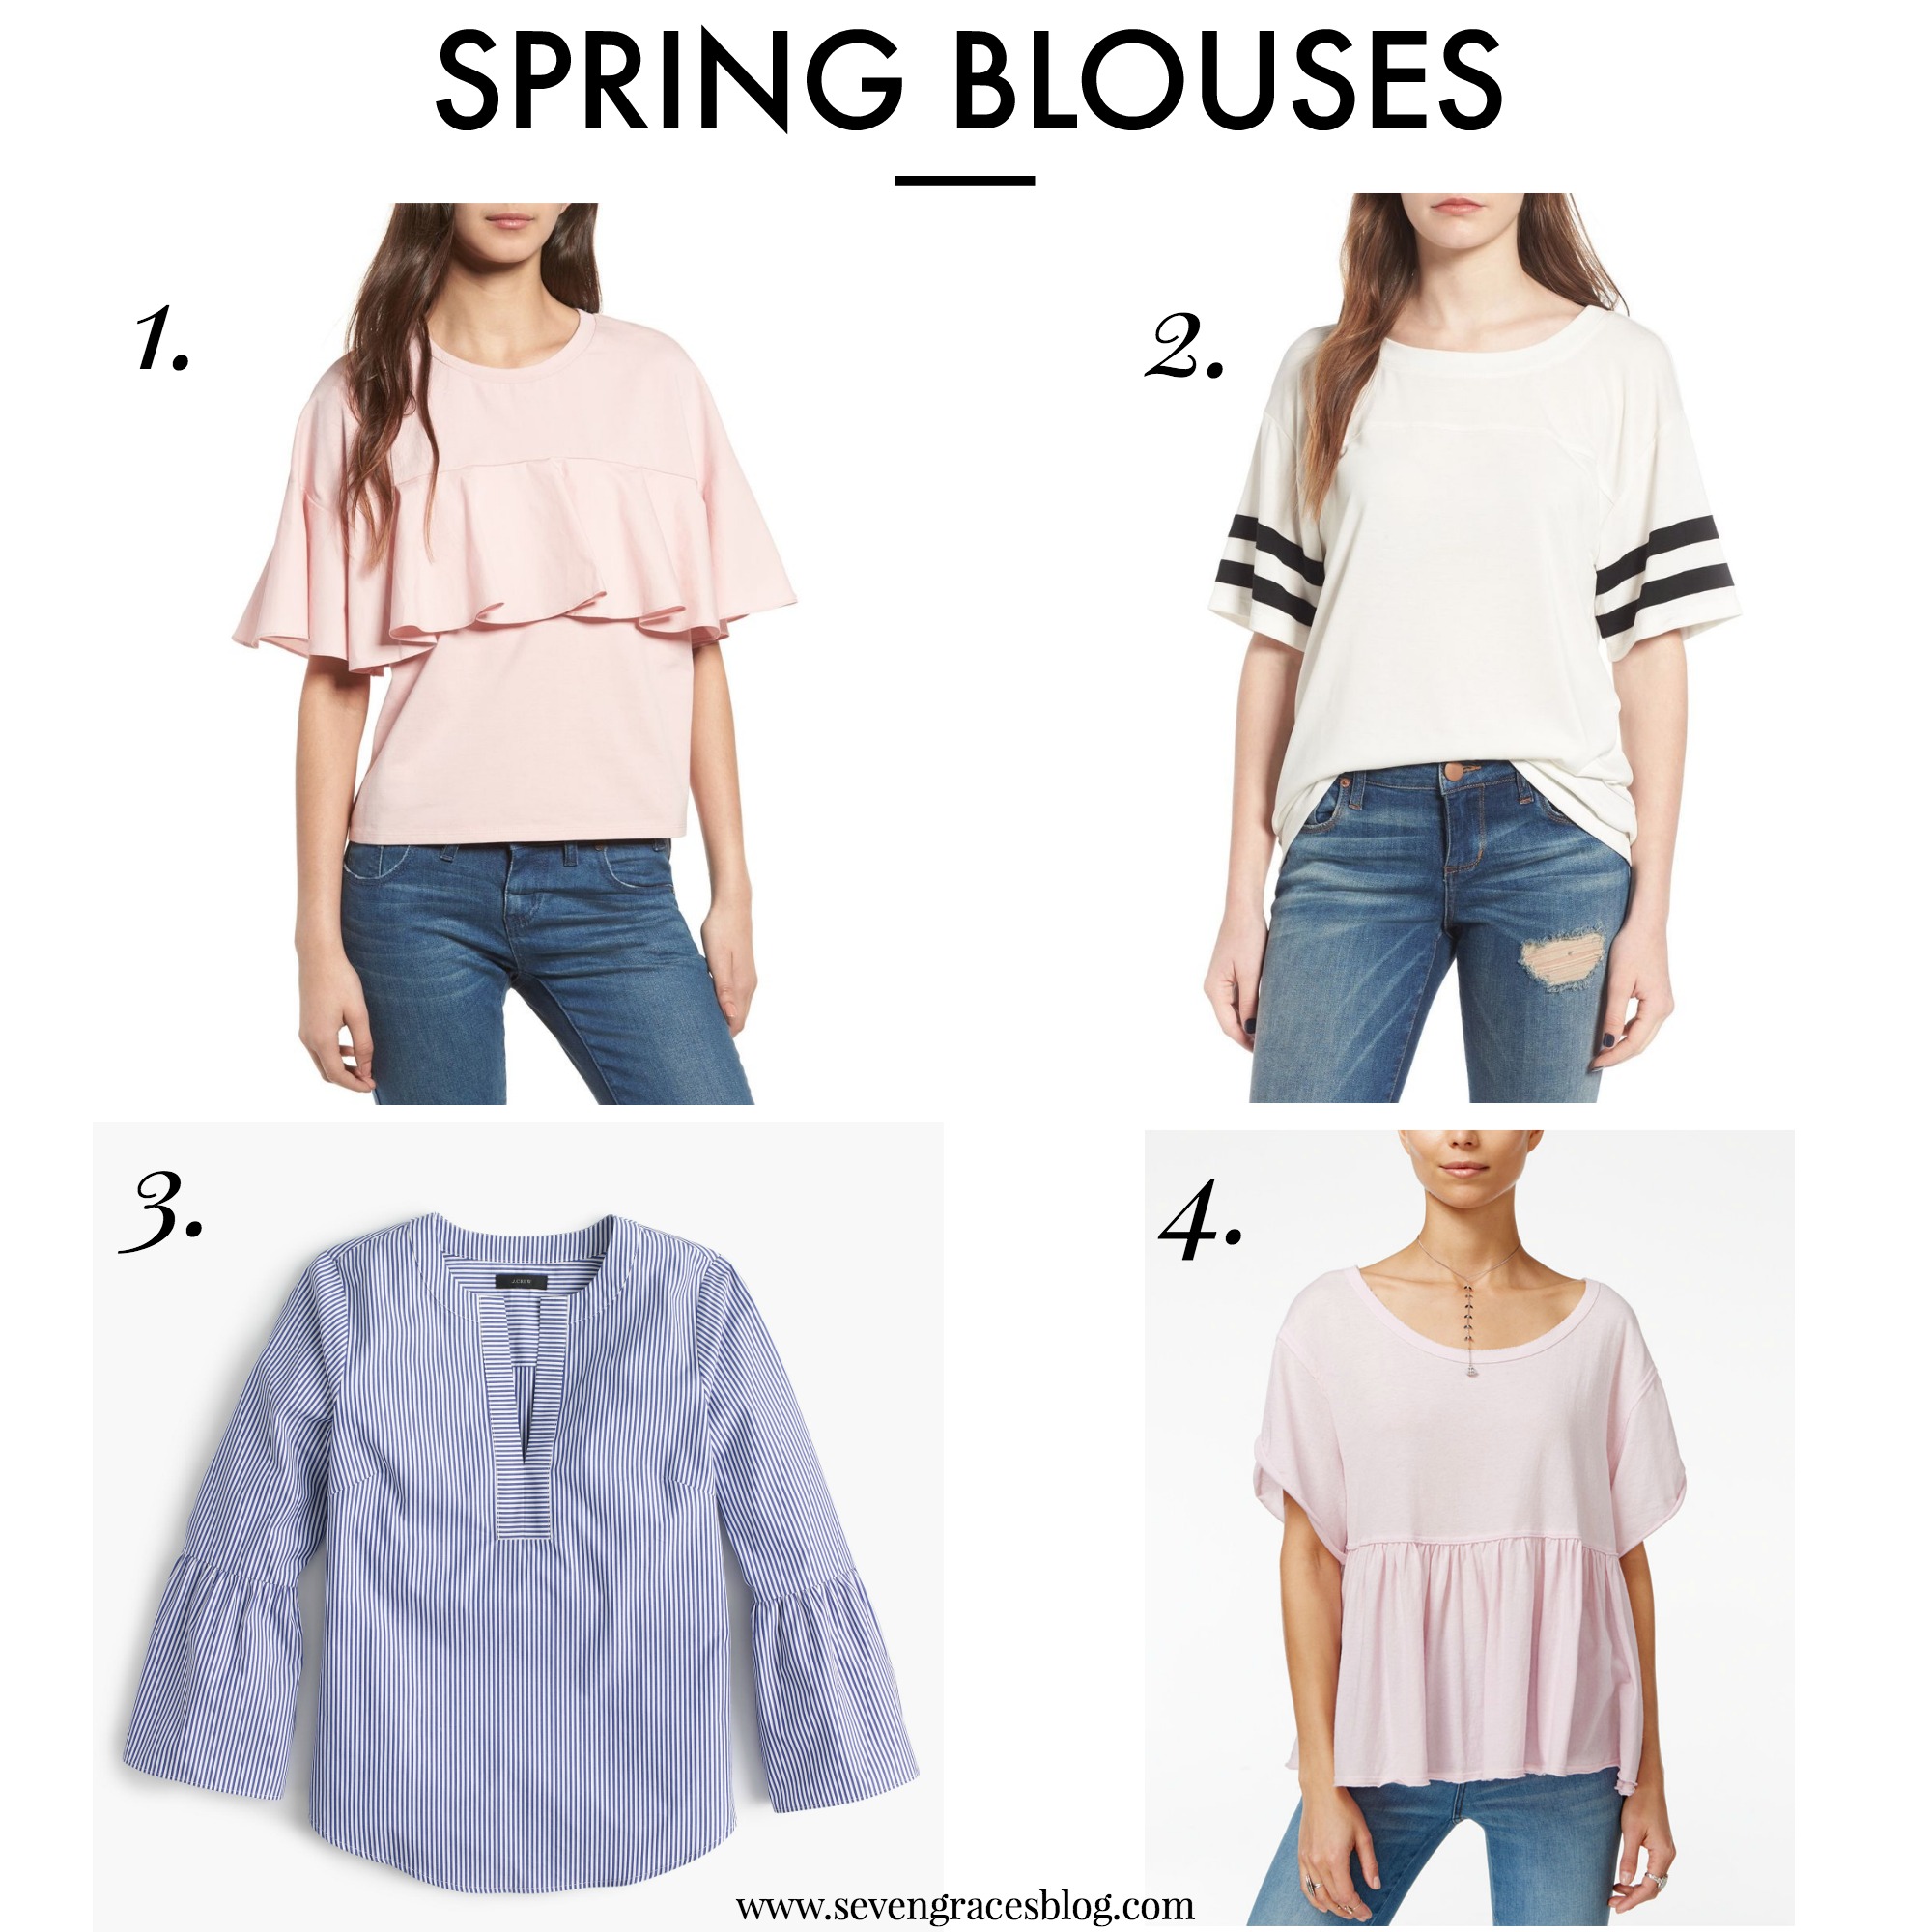 Fun & classic spring blouses to spruce up your wardrobe. Great, comfortable tees and shirts to help you look polished.